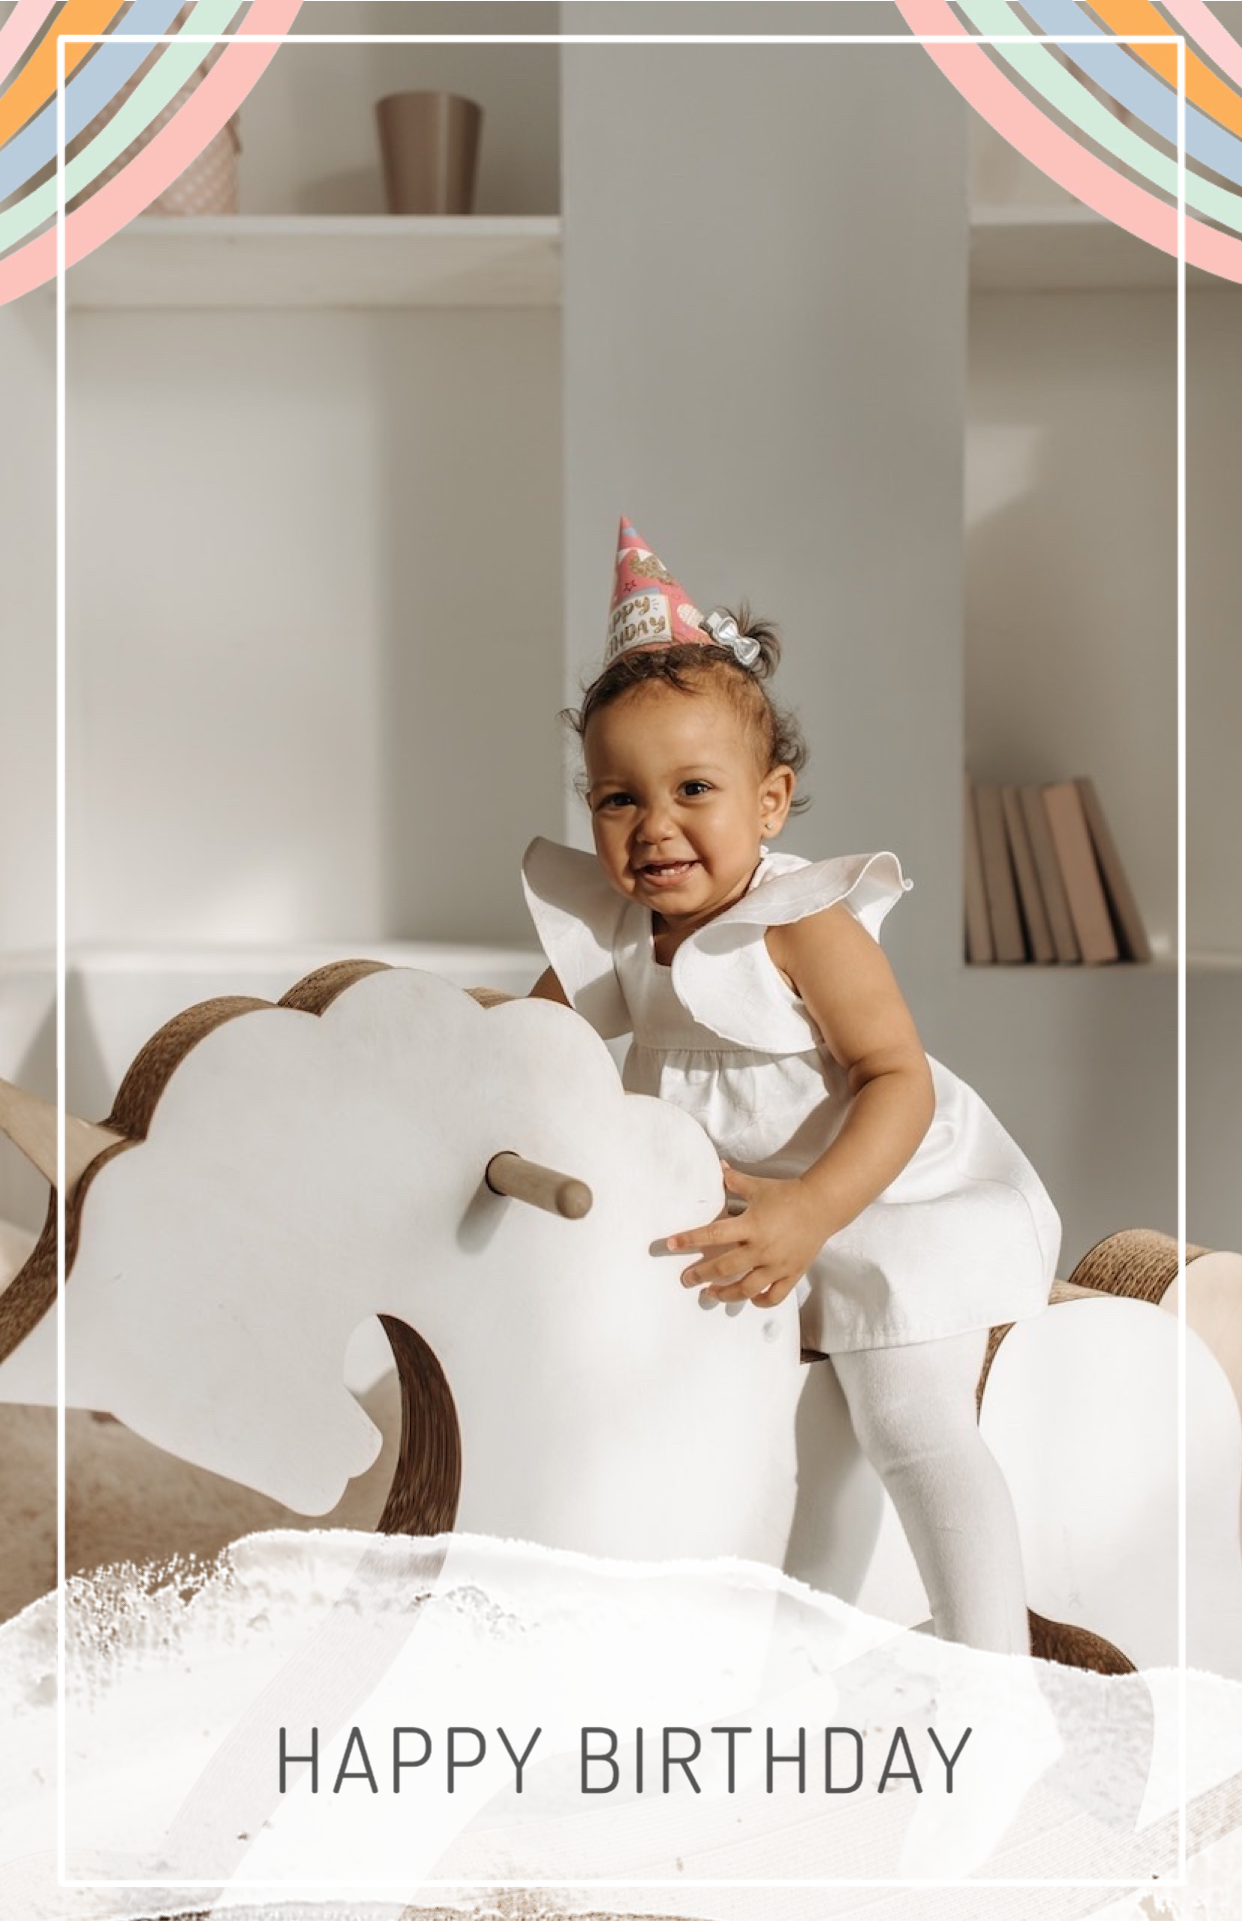 Child playing with unicorn wearing a crown happy birthday template